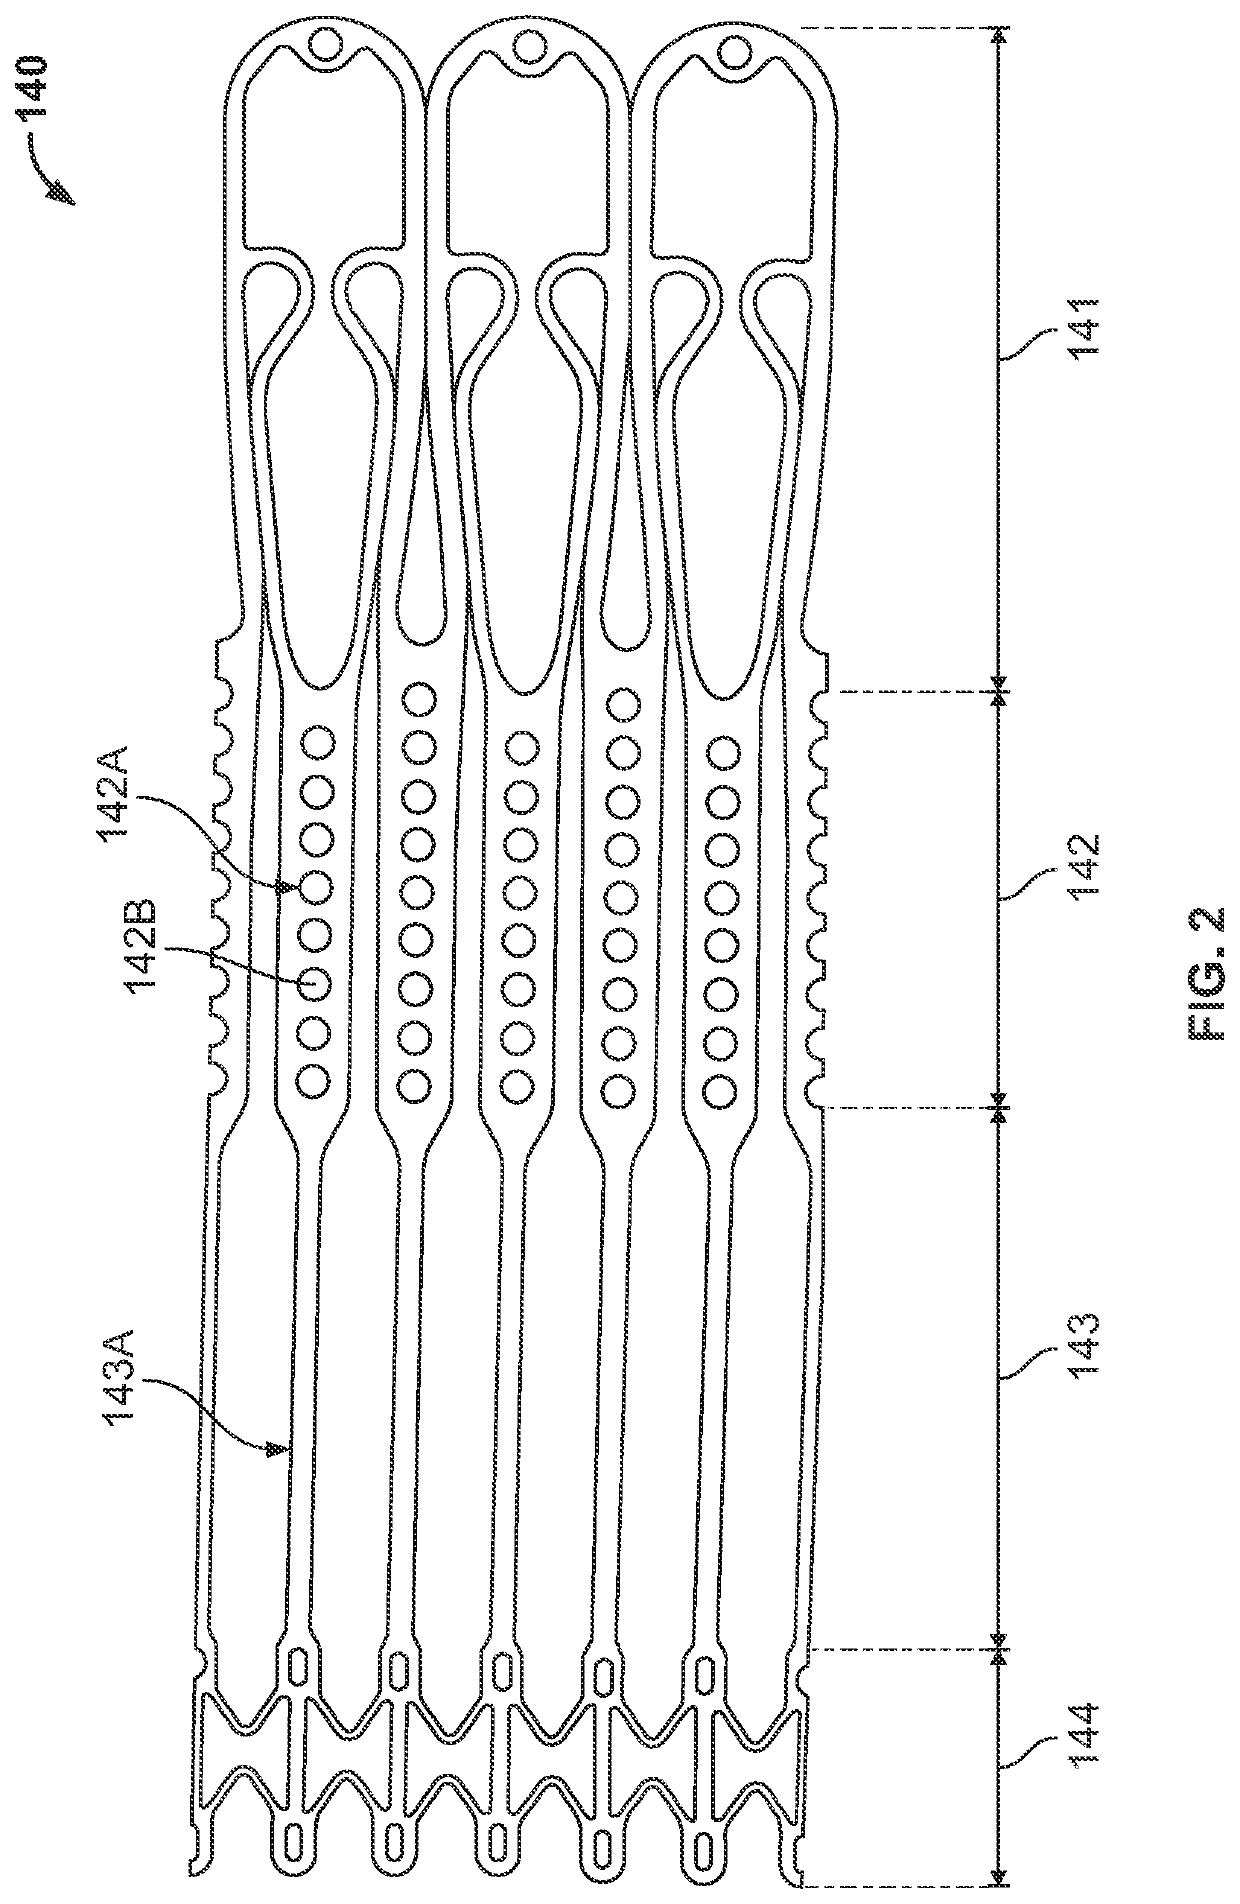 Apparatus And Methods For Minimally Invasive Transcatheter Transapical Puncture, Imaging, and Catheter Alignment Techniques